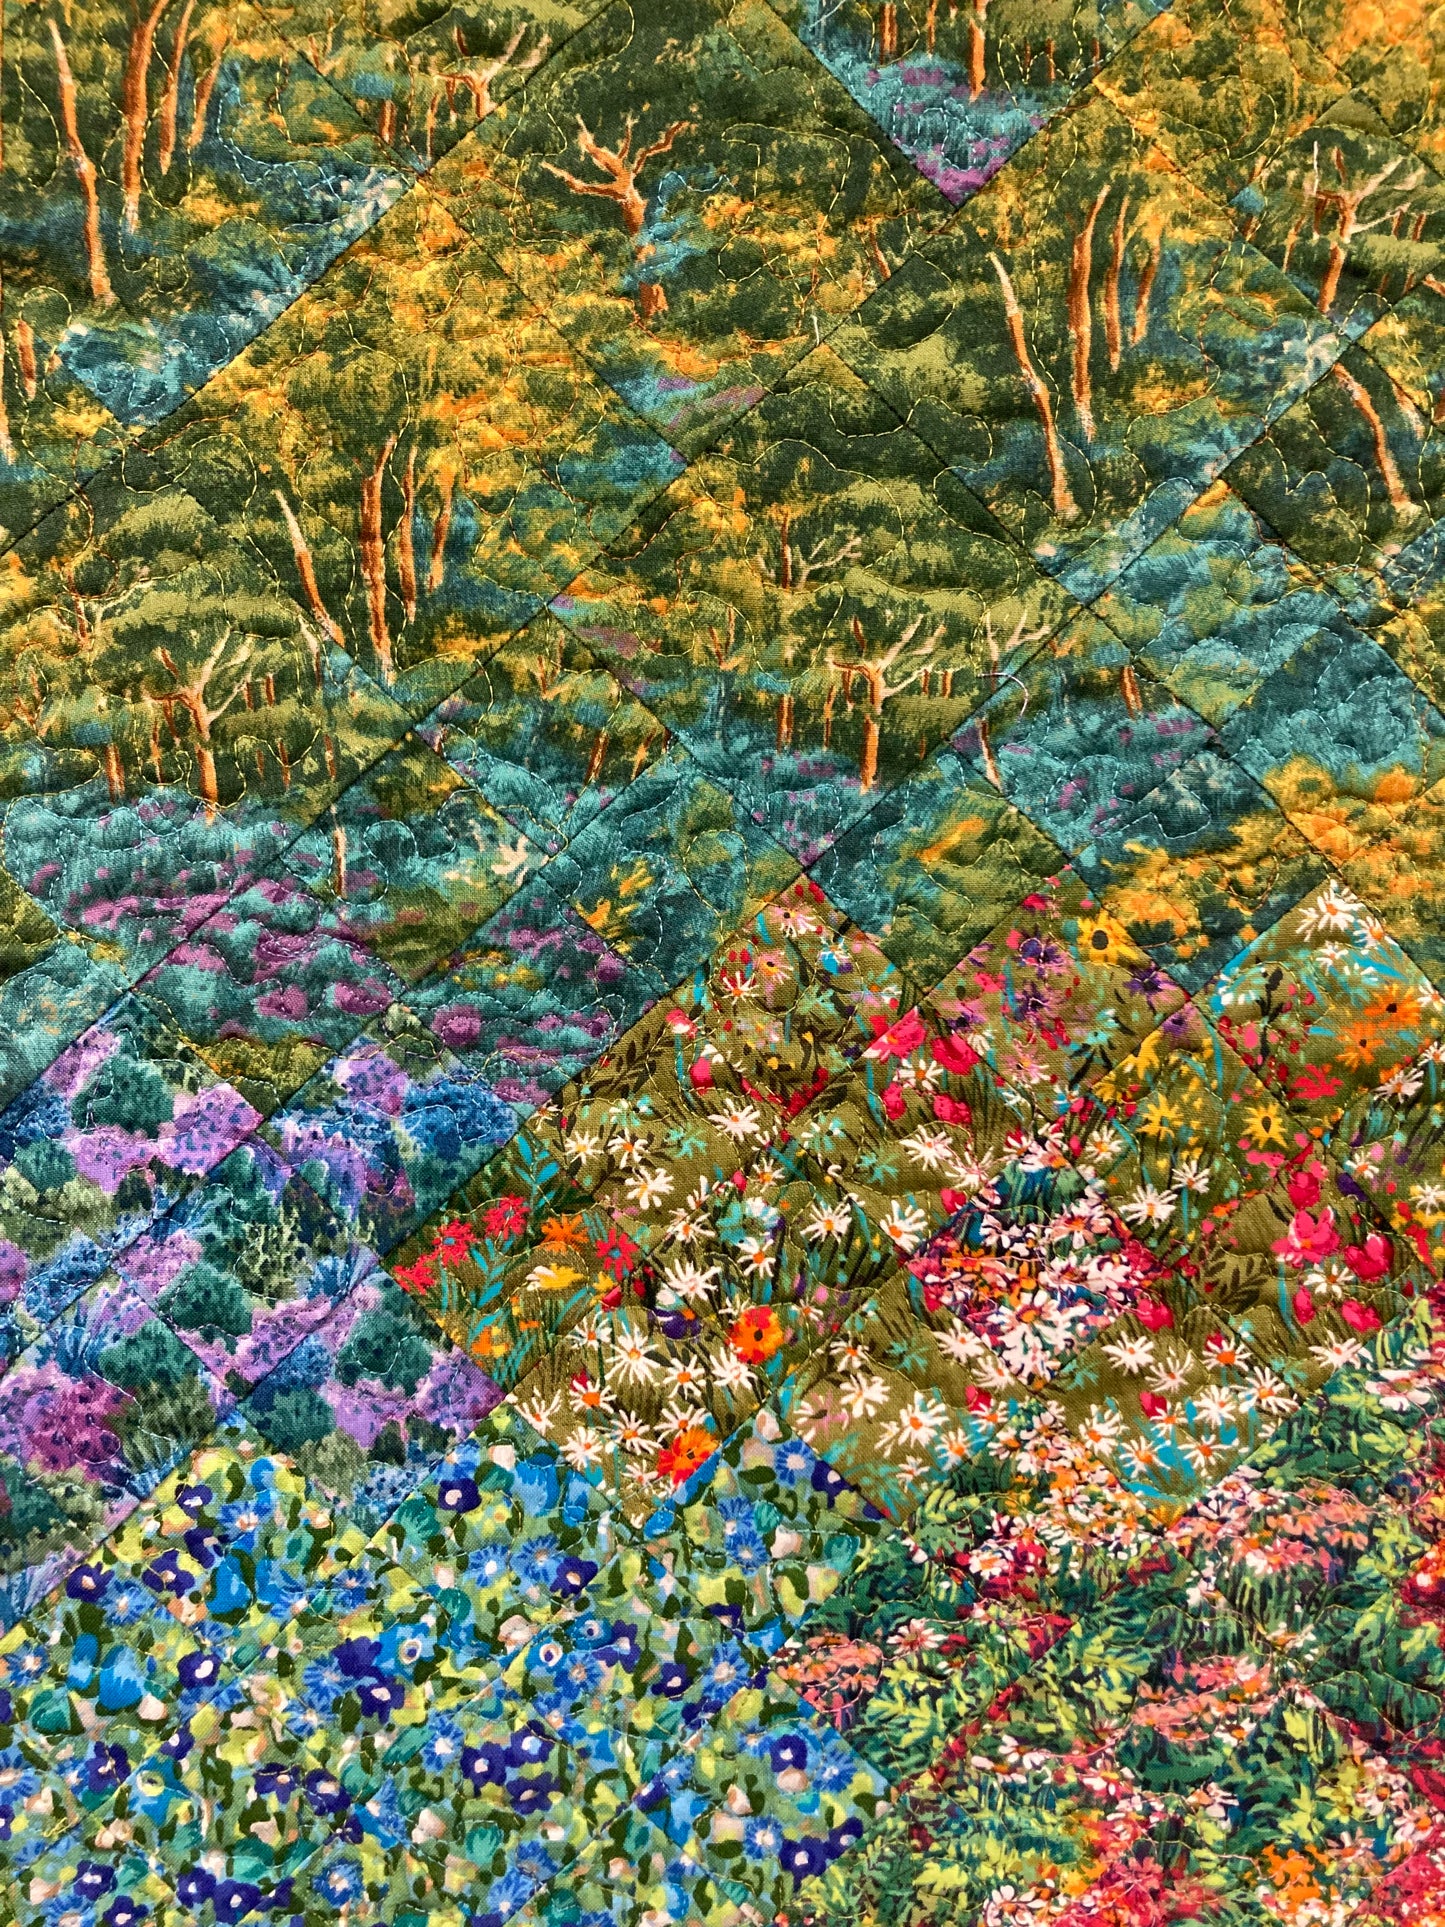 Mountain Art Quilt Tapestry, Turquoise Meadow Flowers Fabric Wall Hanging, Summer Trees Woods, 19x25" Original Handmade Artwork Home Office